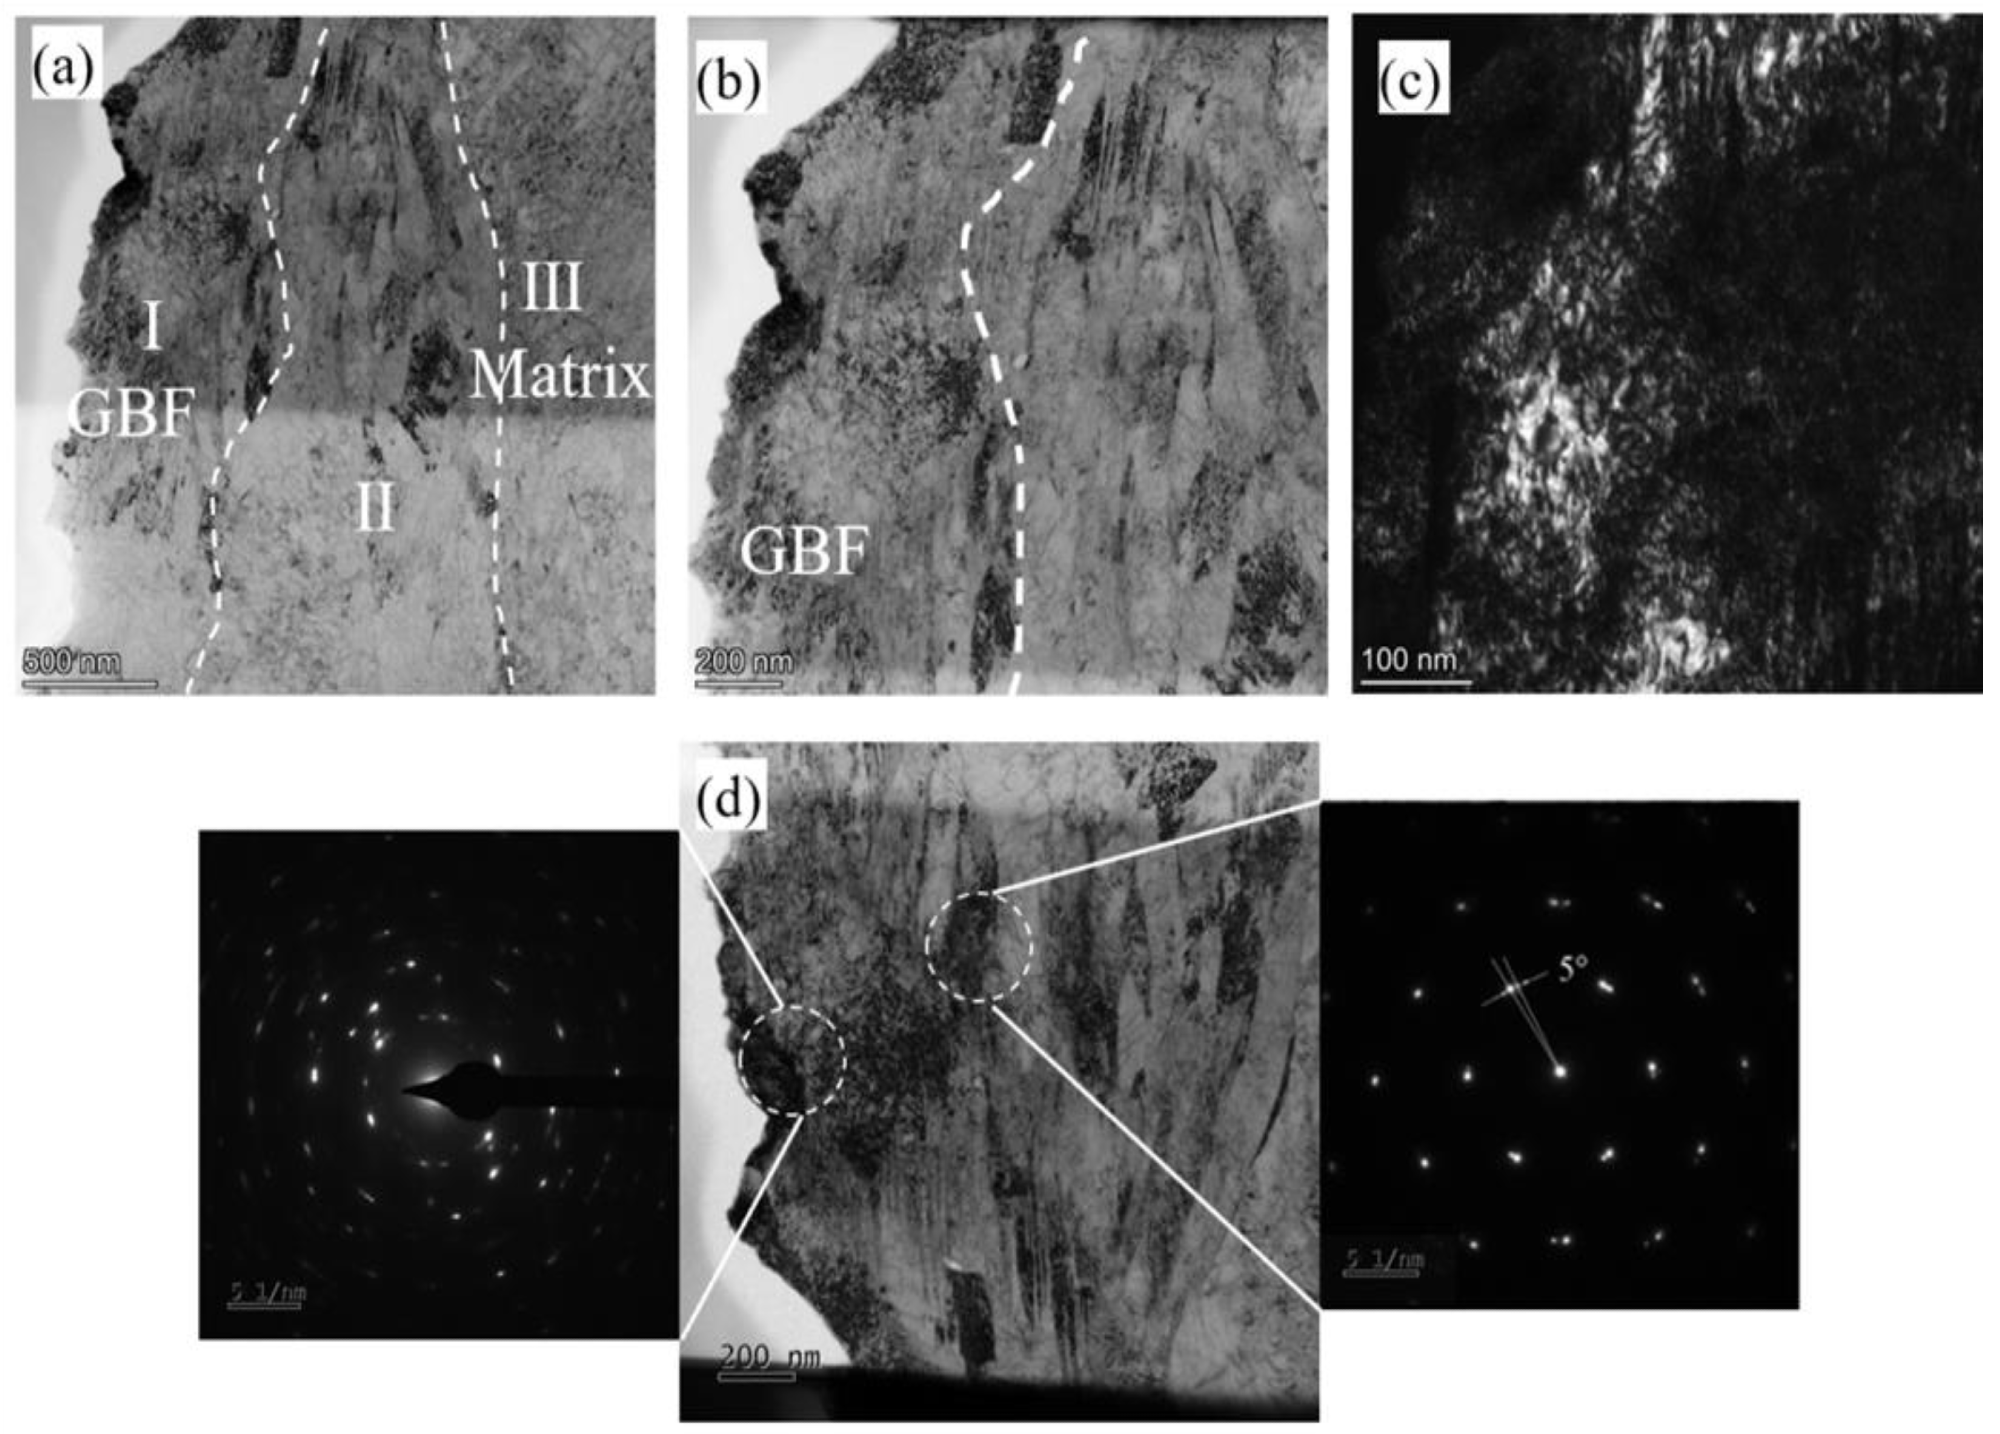 TEM bright field image together with the SAD patterns in the GBF area of the carburized specimen after the VHCF tests at sa = 590 MPa for Nf = 6.66 × 107. (a) is transmission morphology of GBF region, transition region and matrix, (b) is transmission morphology of GBF region, (c) is GBF region transmission amplification morphology, (d) is the location of the selected area diffraction.